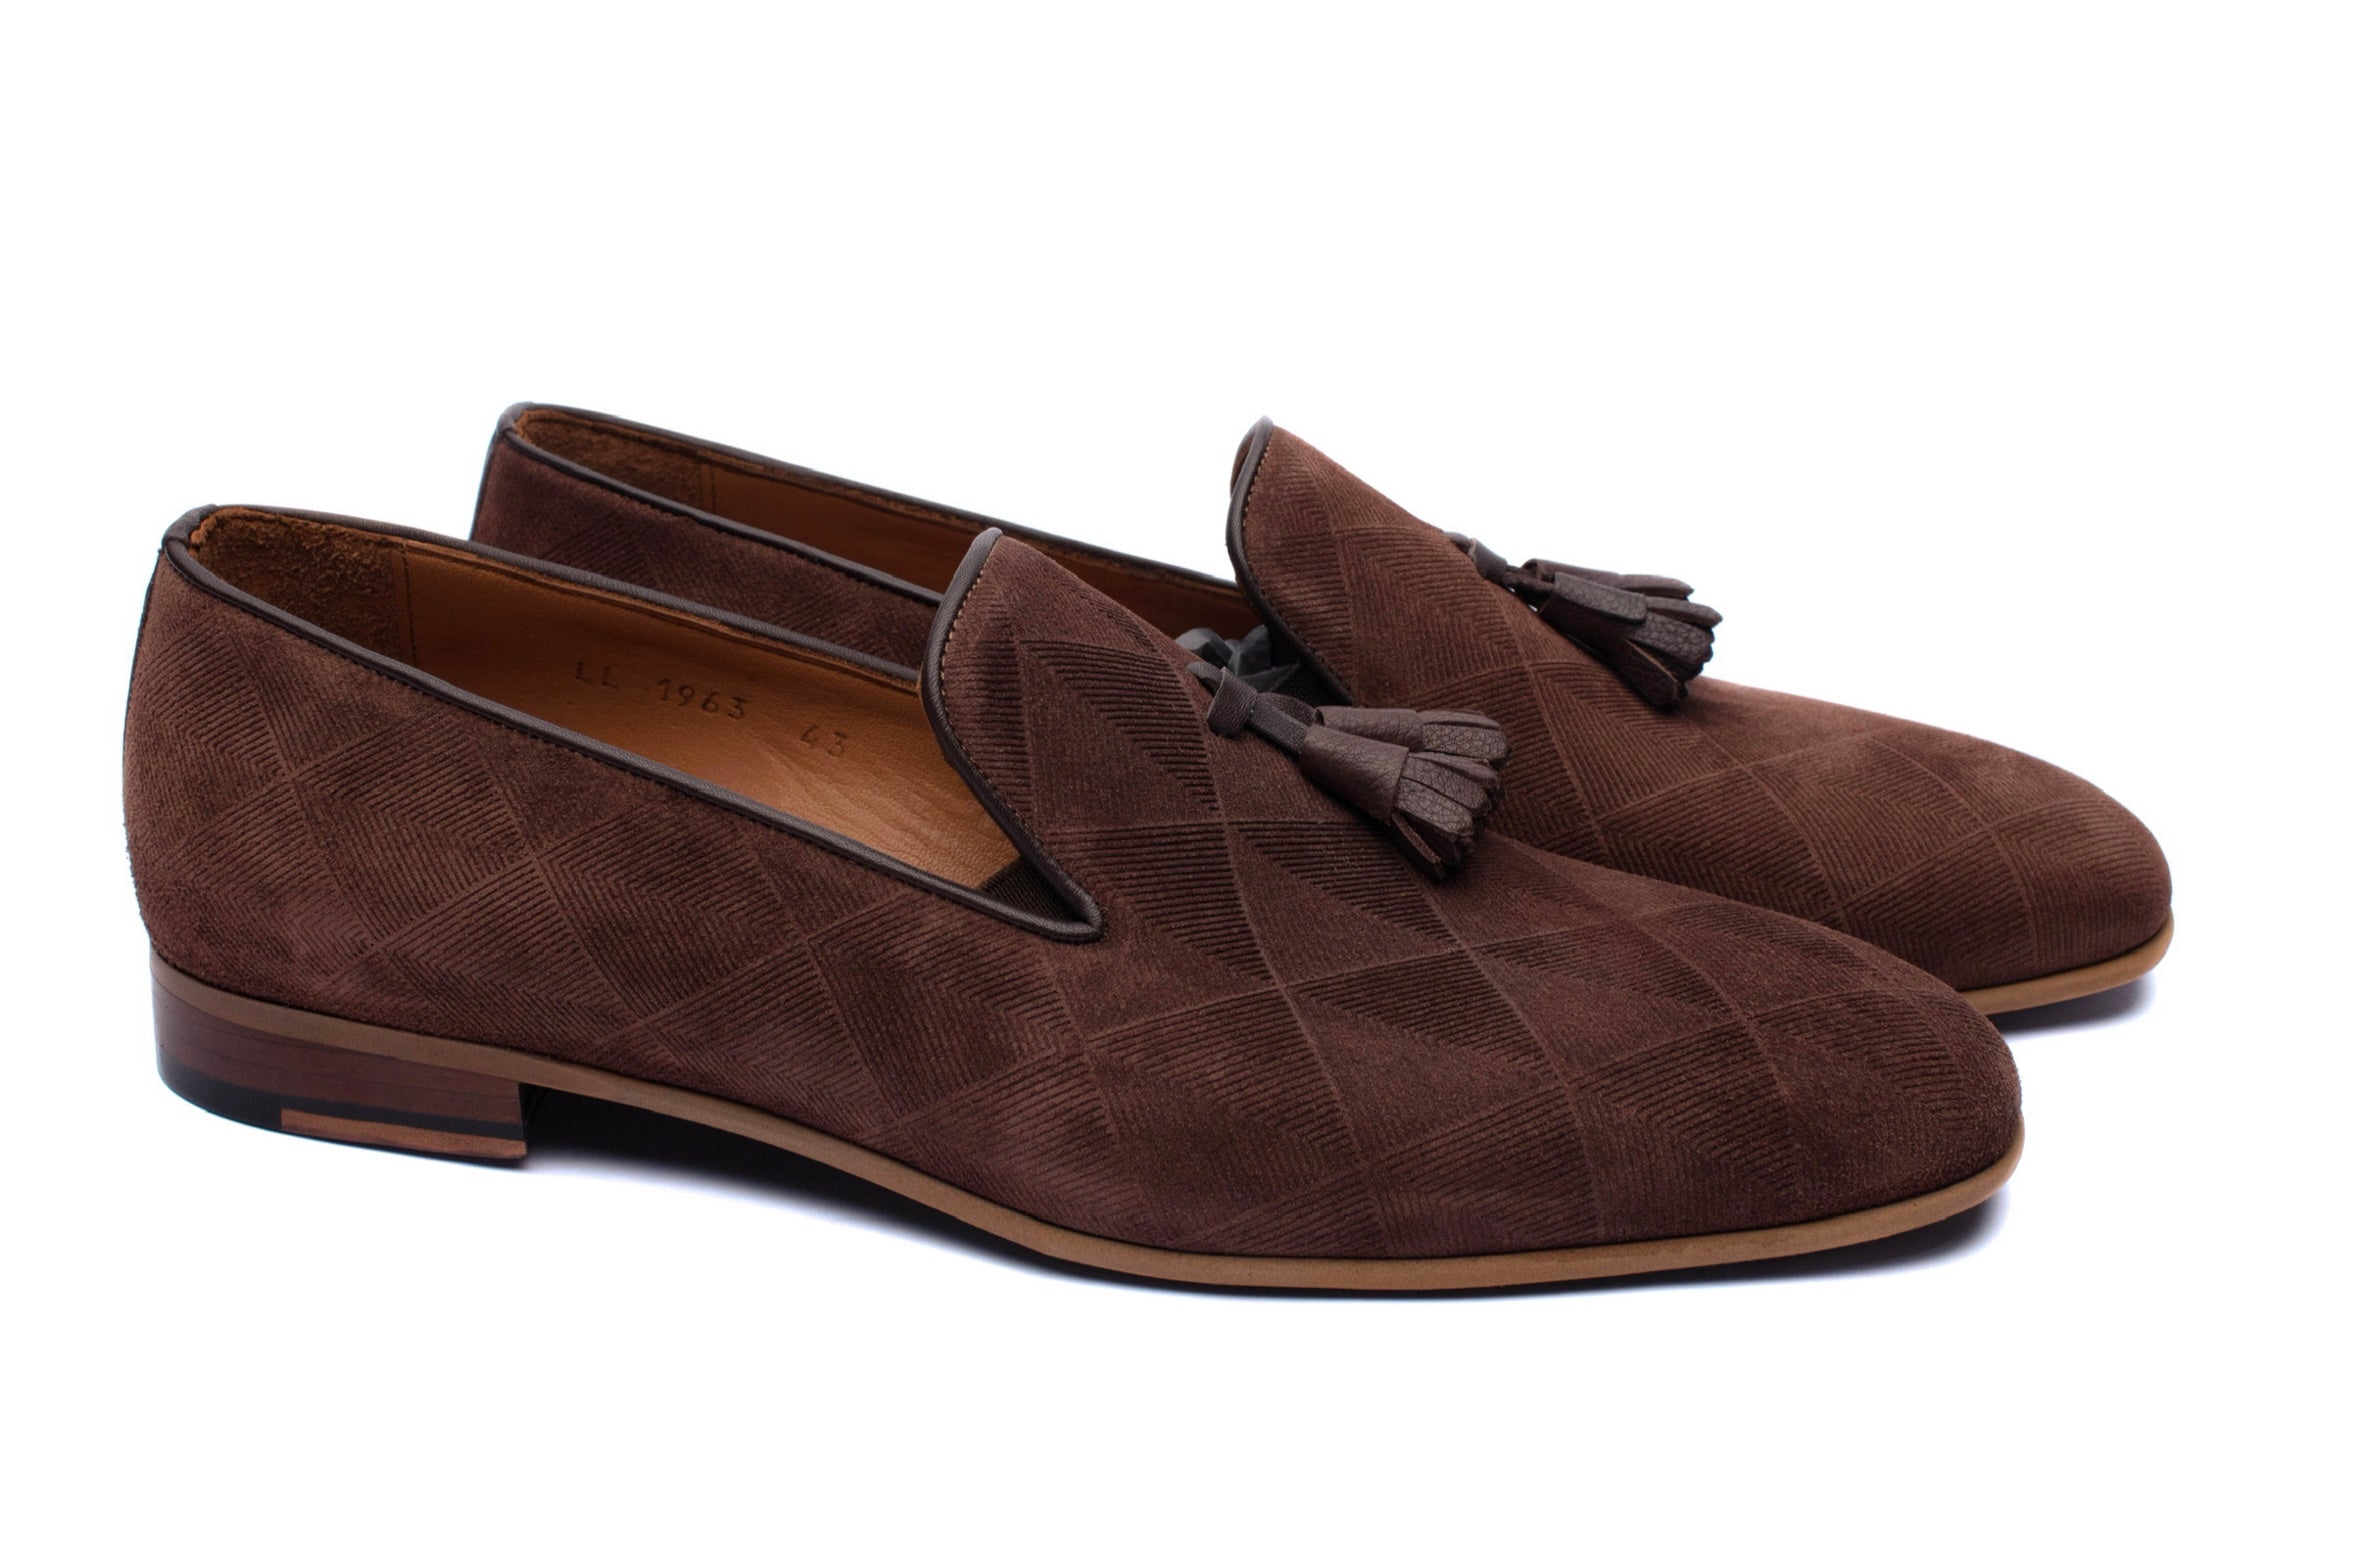 The Diamanté Suede Loafers - Chocolate Brown - Loafers by Urbbana